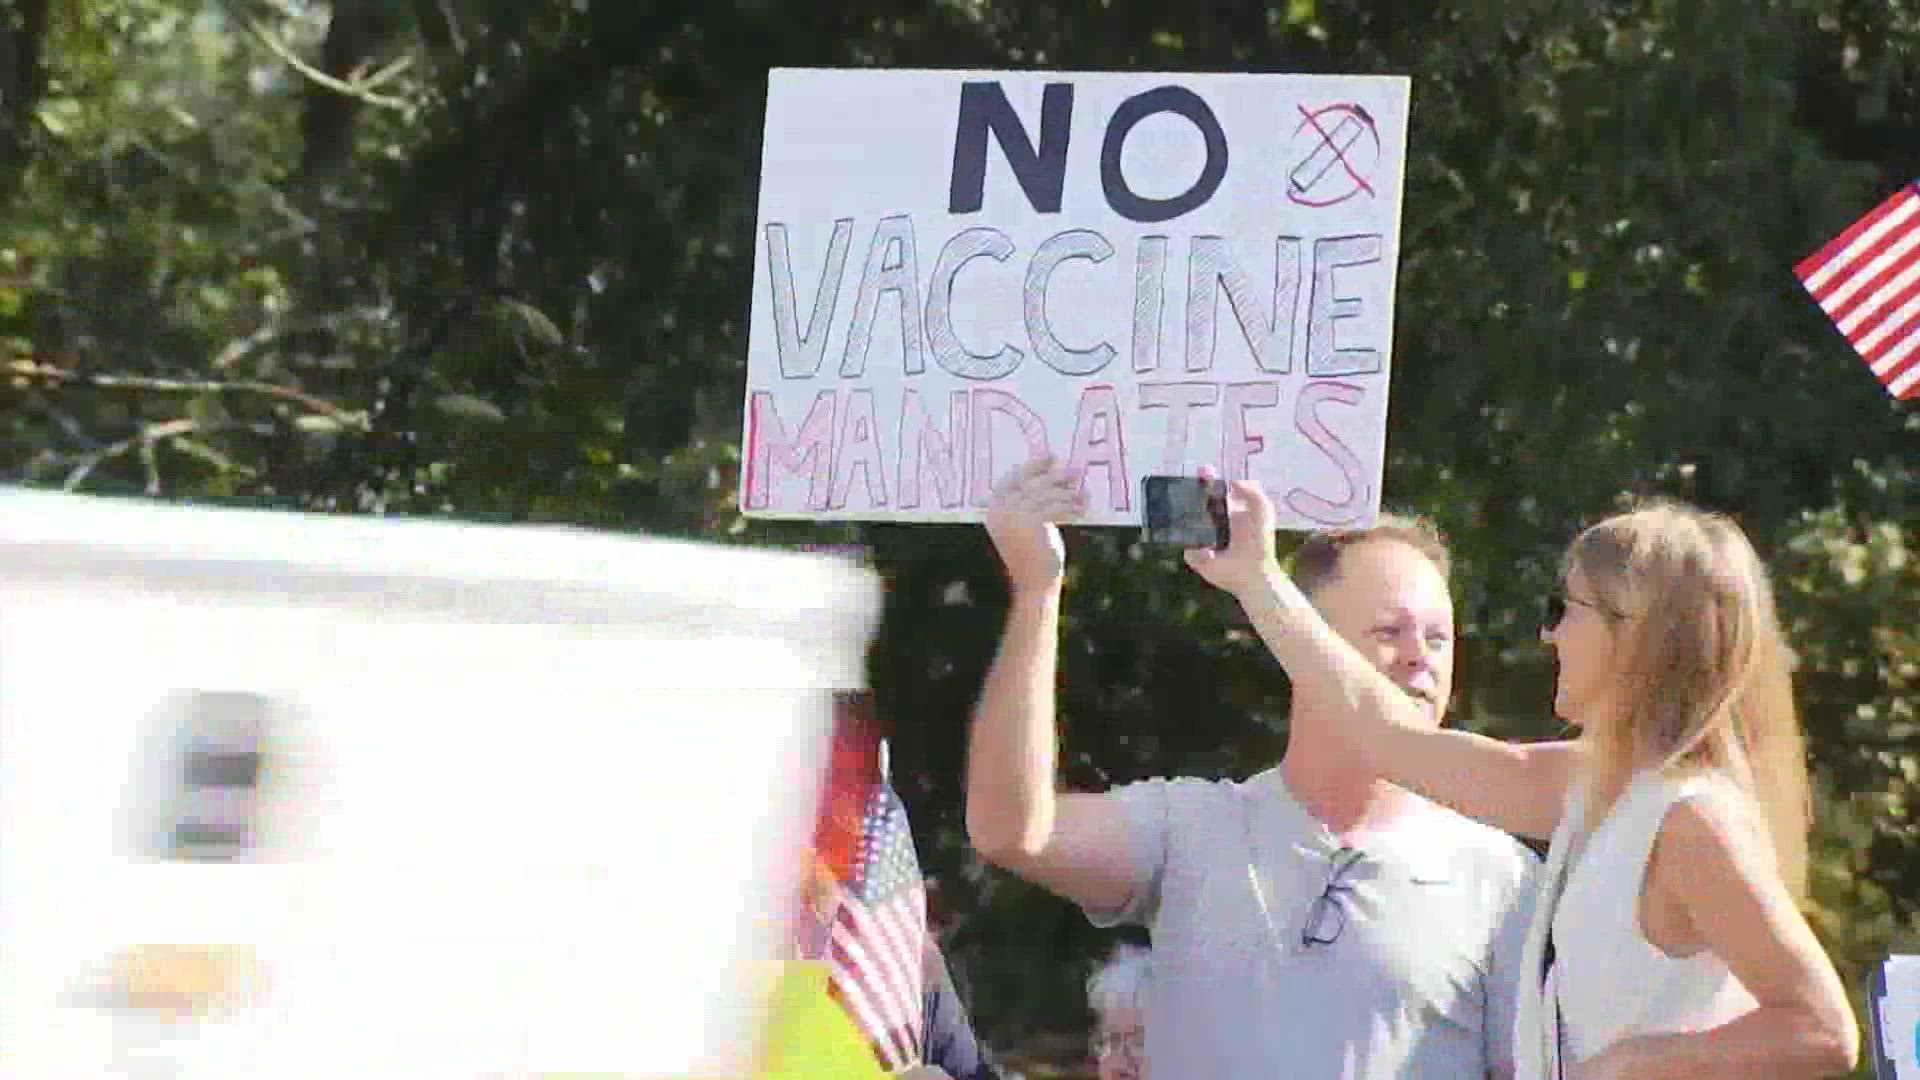 Several lawsuits have been filed to block the Biden administration's vaccine mandate.